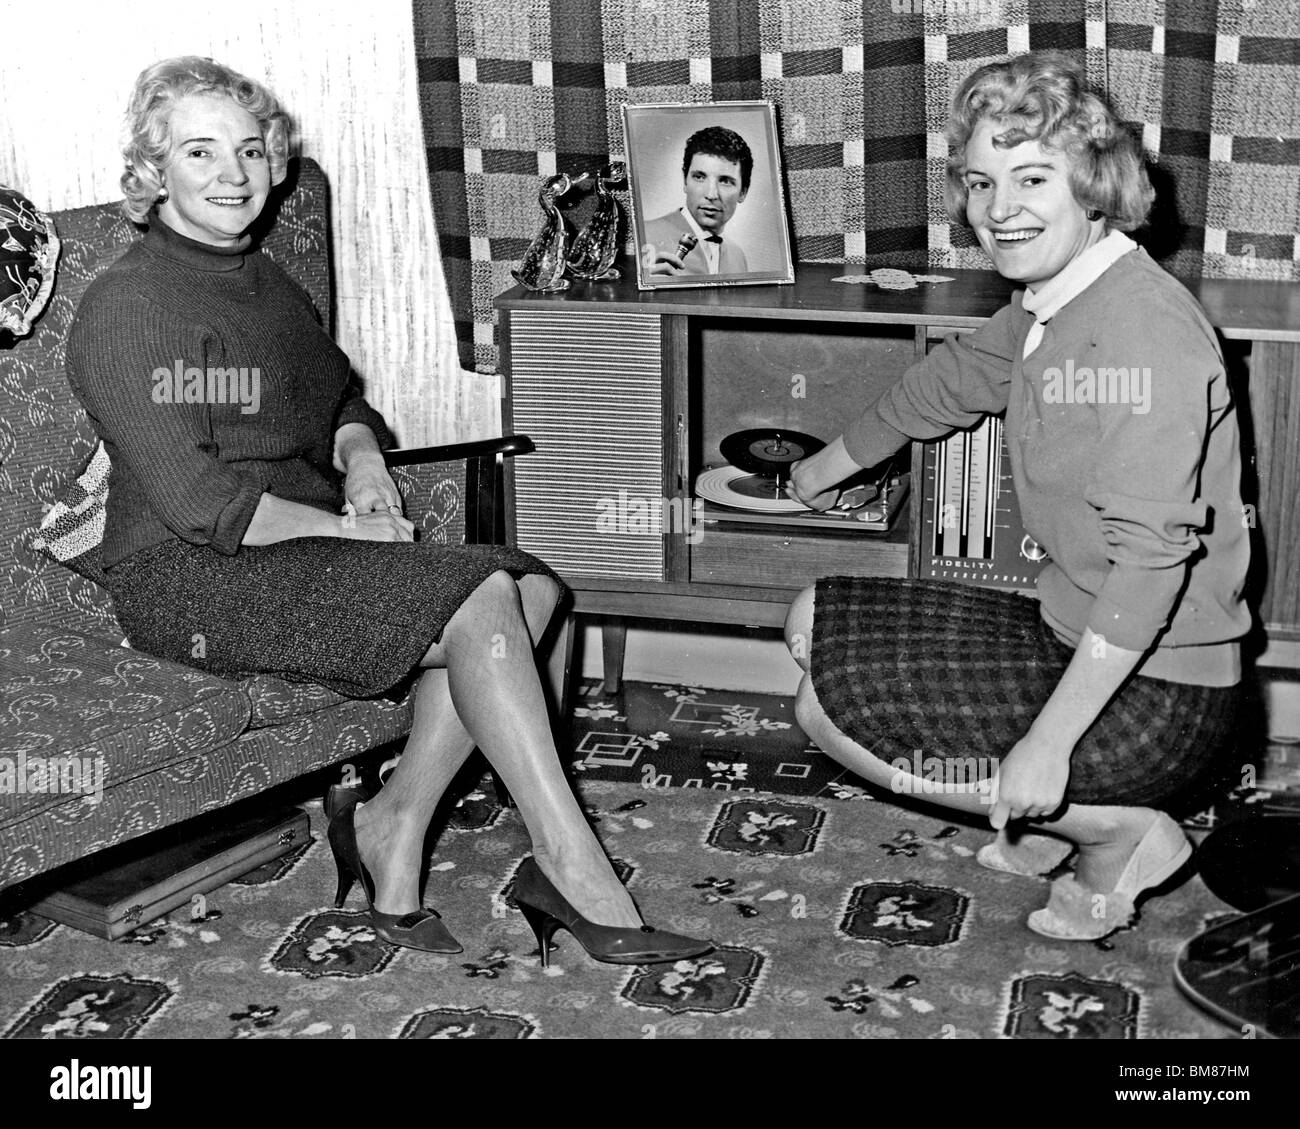 TOM JONES - Welsh singer. His mother Freda Woodward and and his sister Sheila at their home in Pontypridd, Wales, about 1968 Stock Photo